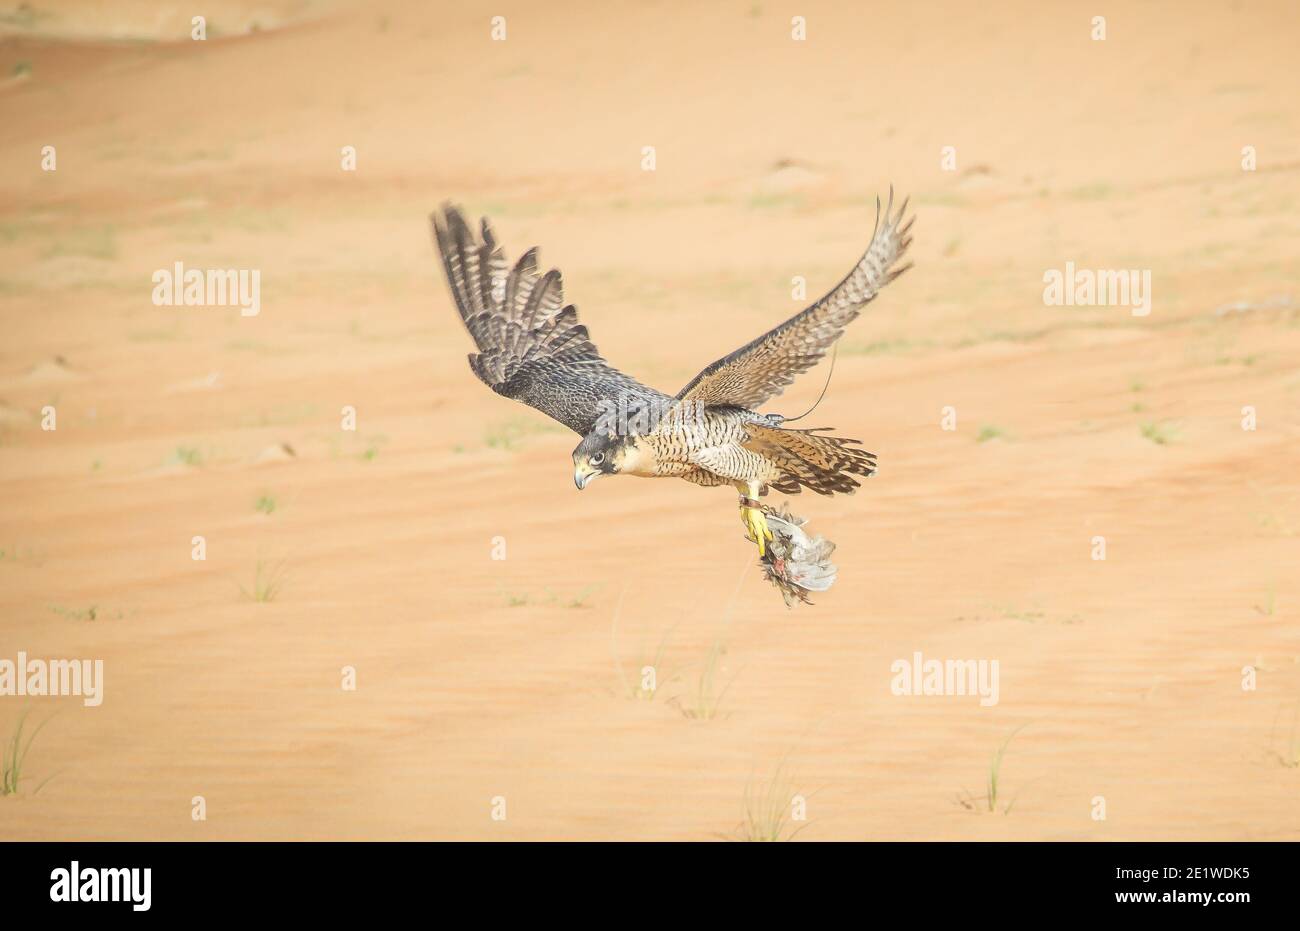 Arabian Desert falcon flying high speed after catching his prey Stock Photo